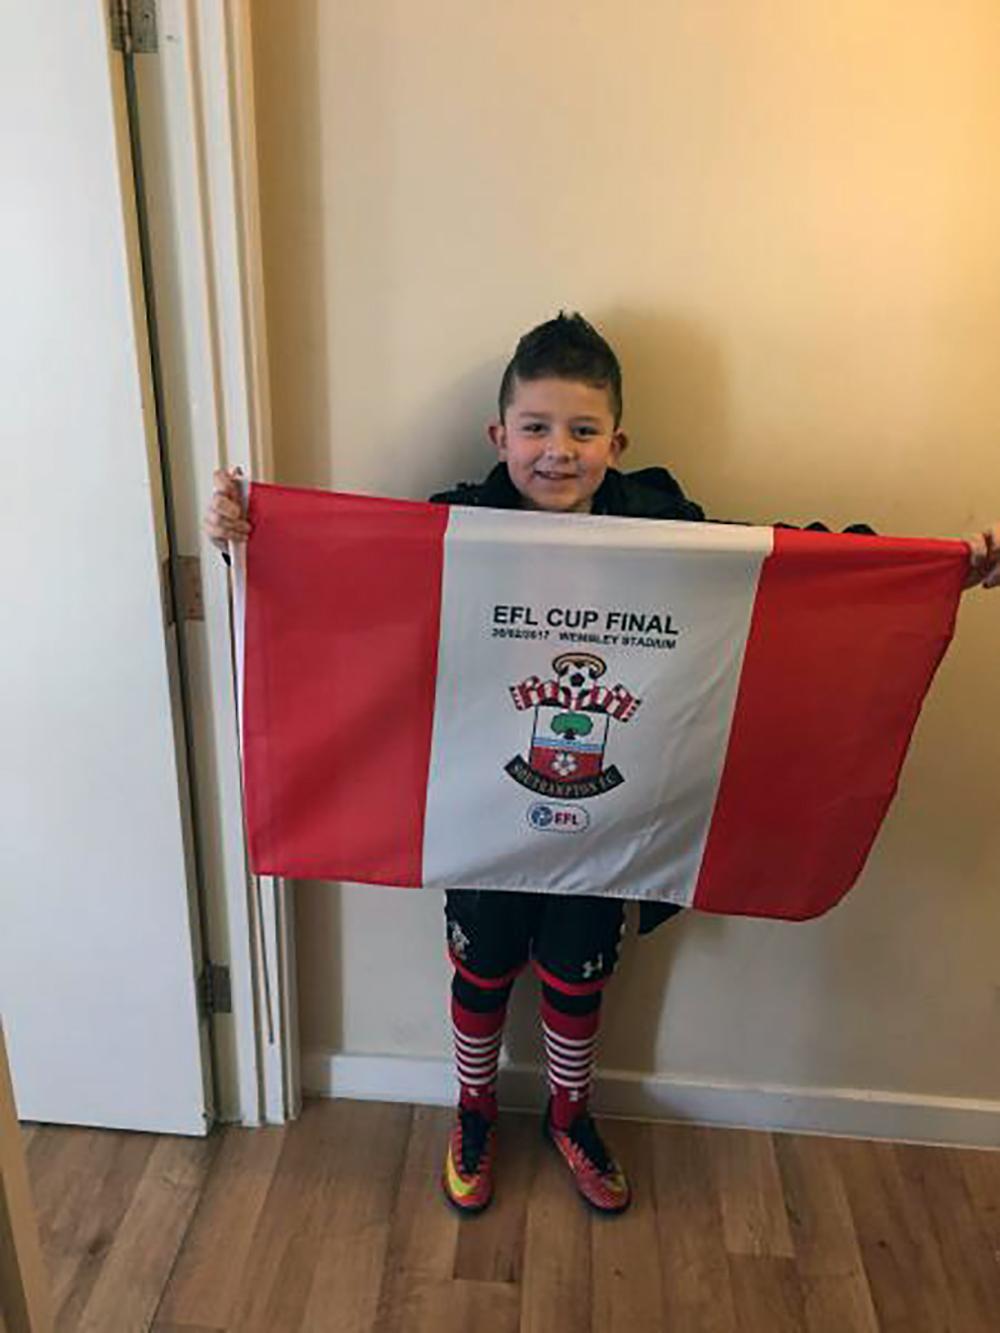 Harvey Wickham, 7, will be shouting on the Saints today